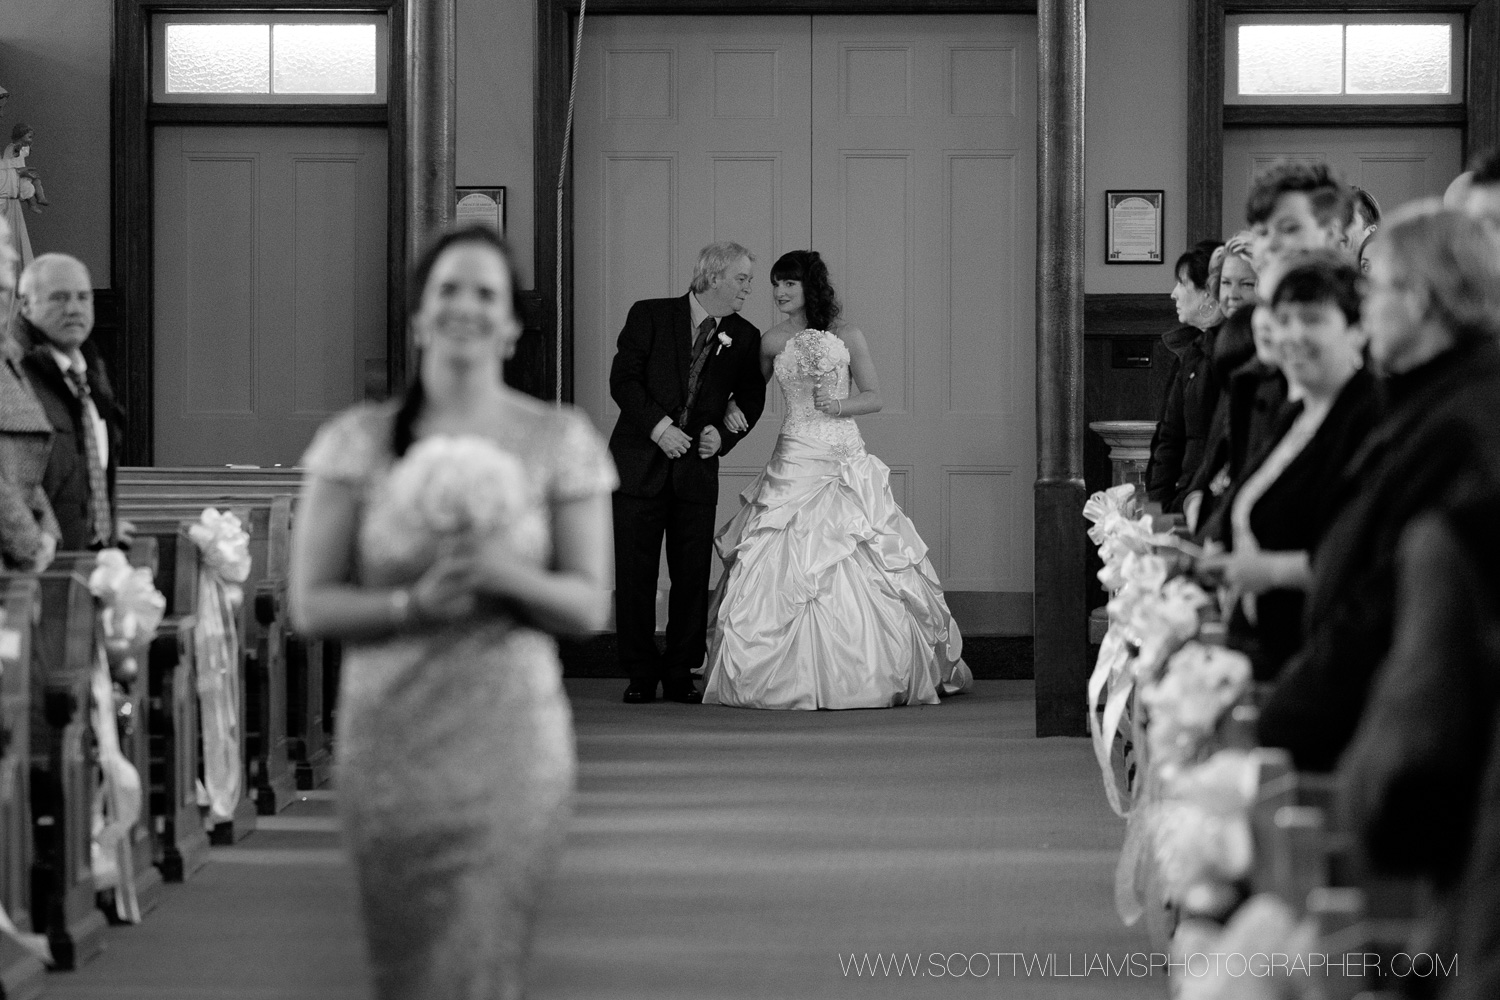  The bride and her father share a moment before walking down the aisle during her wedding in North Bay, Ontario. 